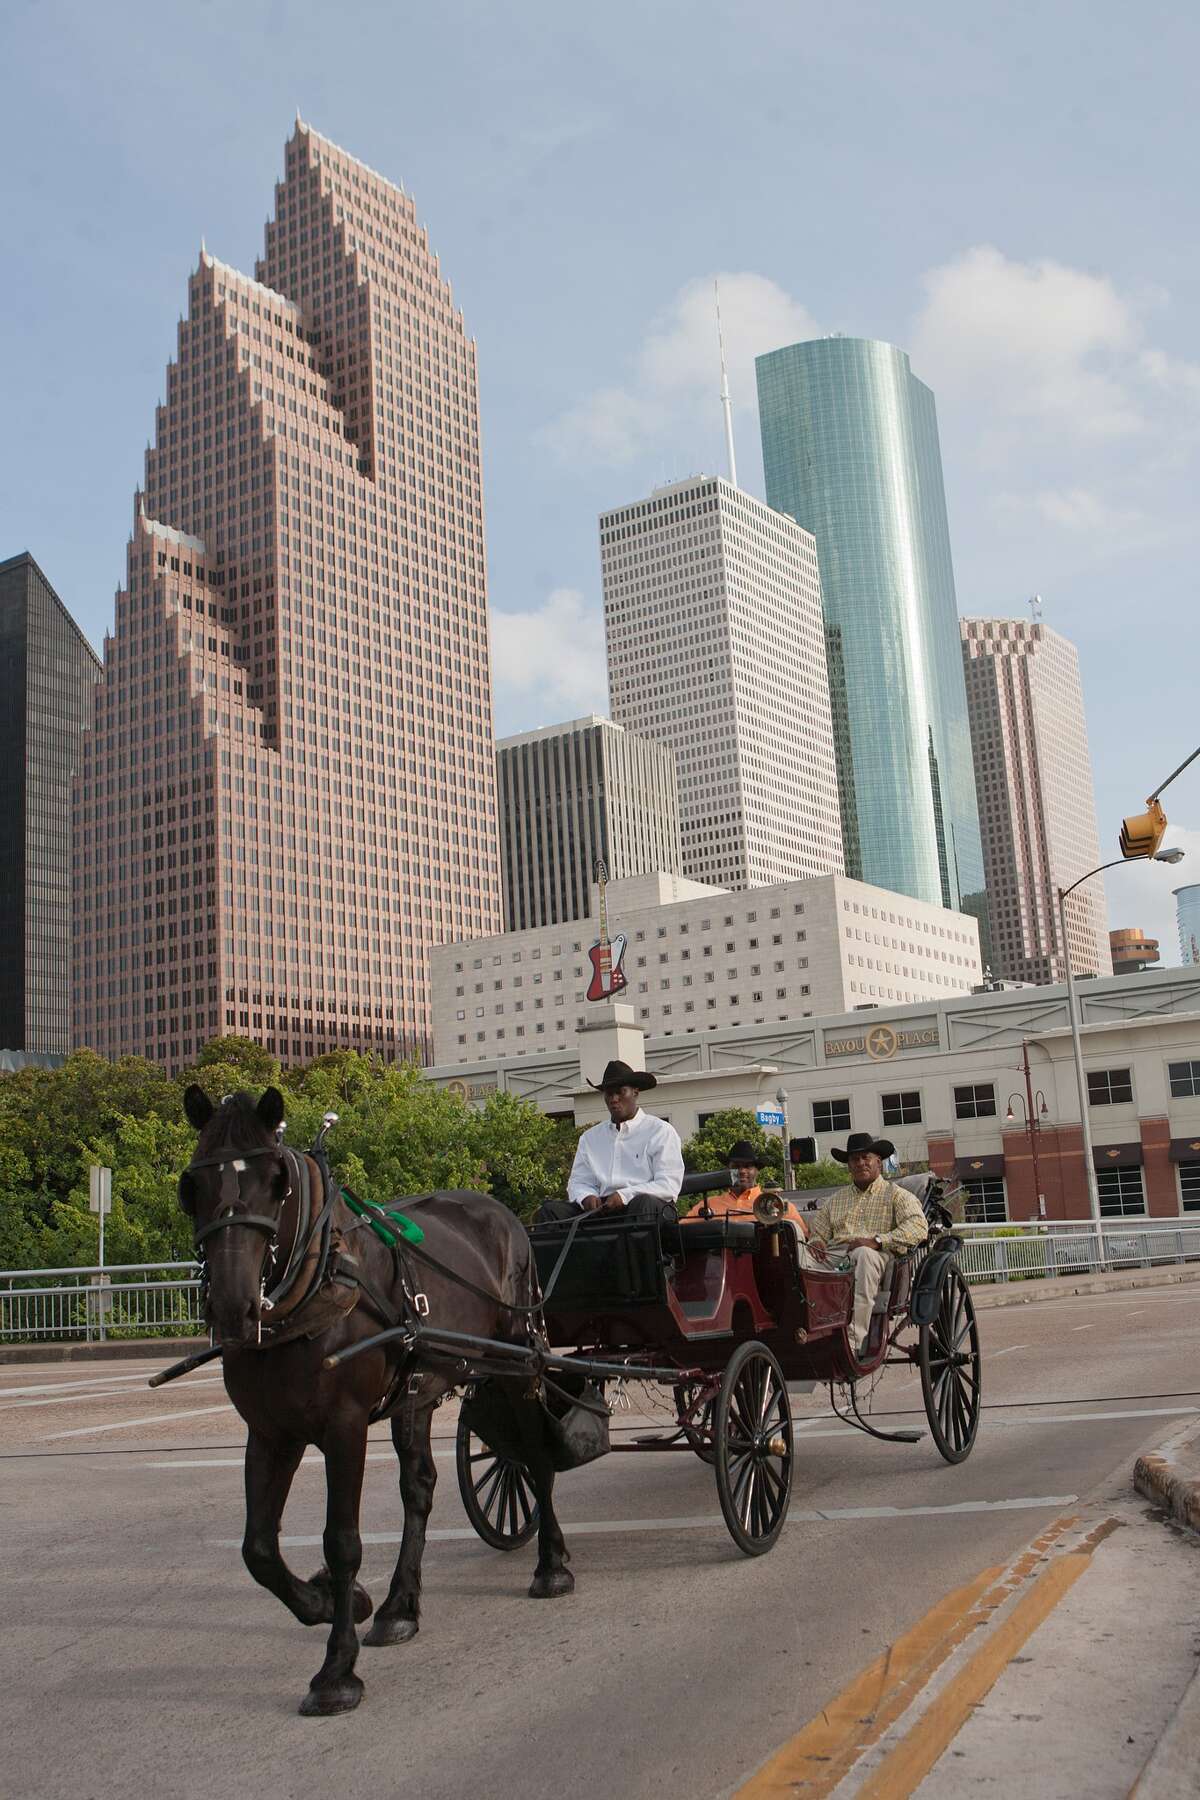 A report by CBRE says downtown Houston is verging on "gateway market" status, all the more reason for a tour like those offered by Vintage Carriage Co.